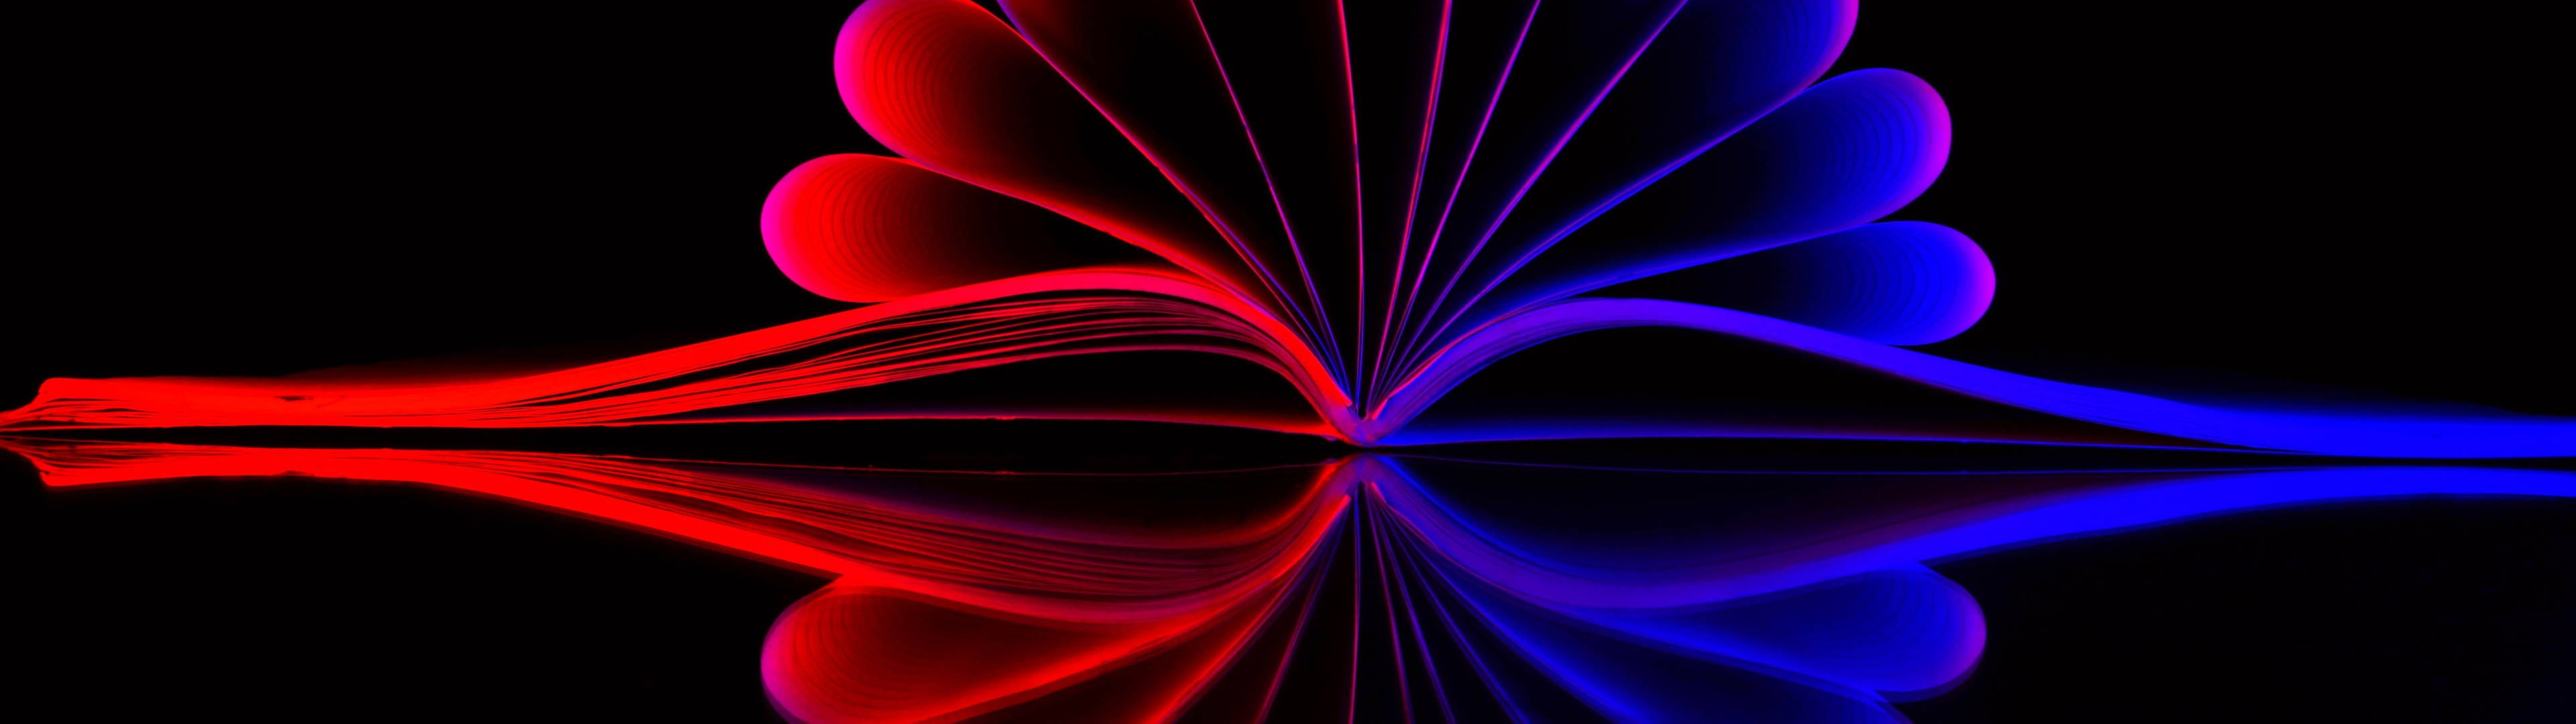 Blue Black Red 4k Dual Monitor Background